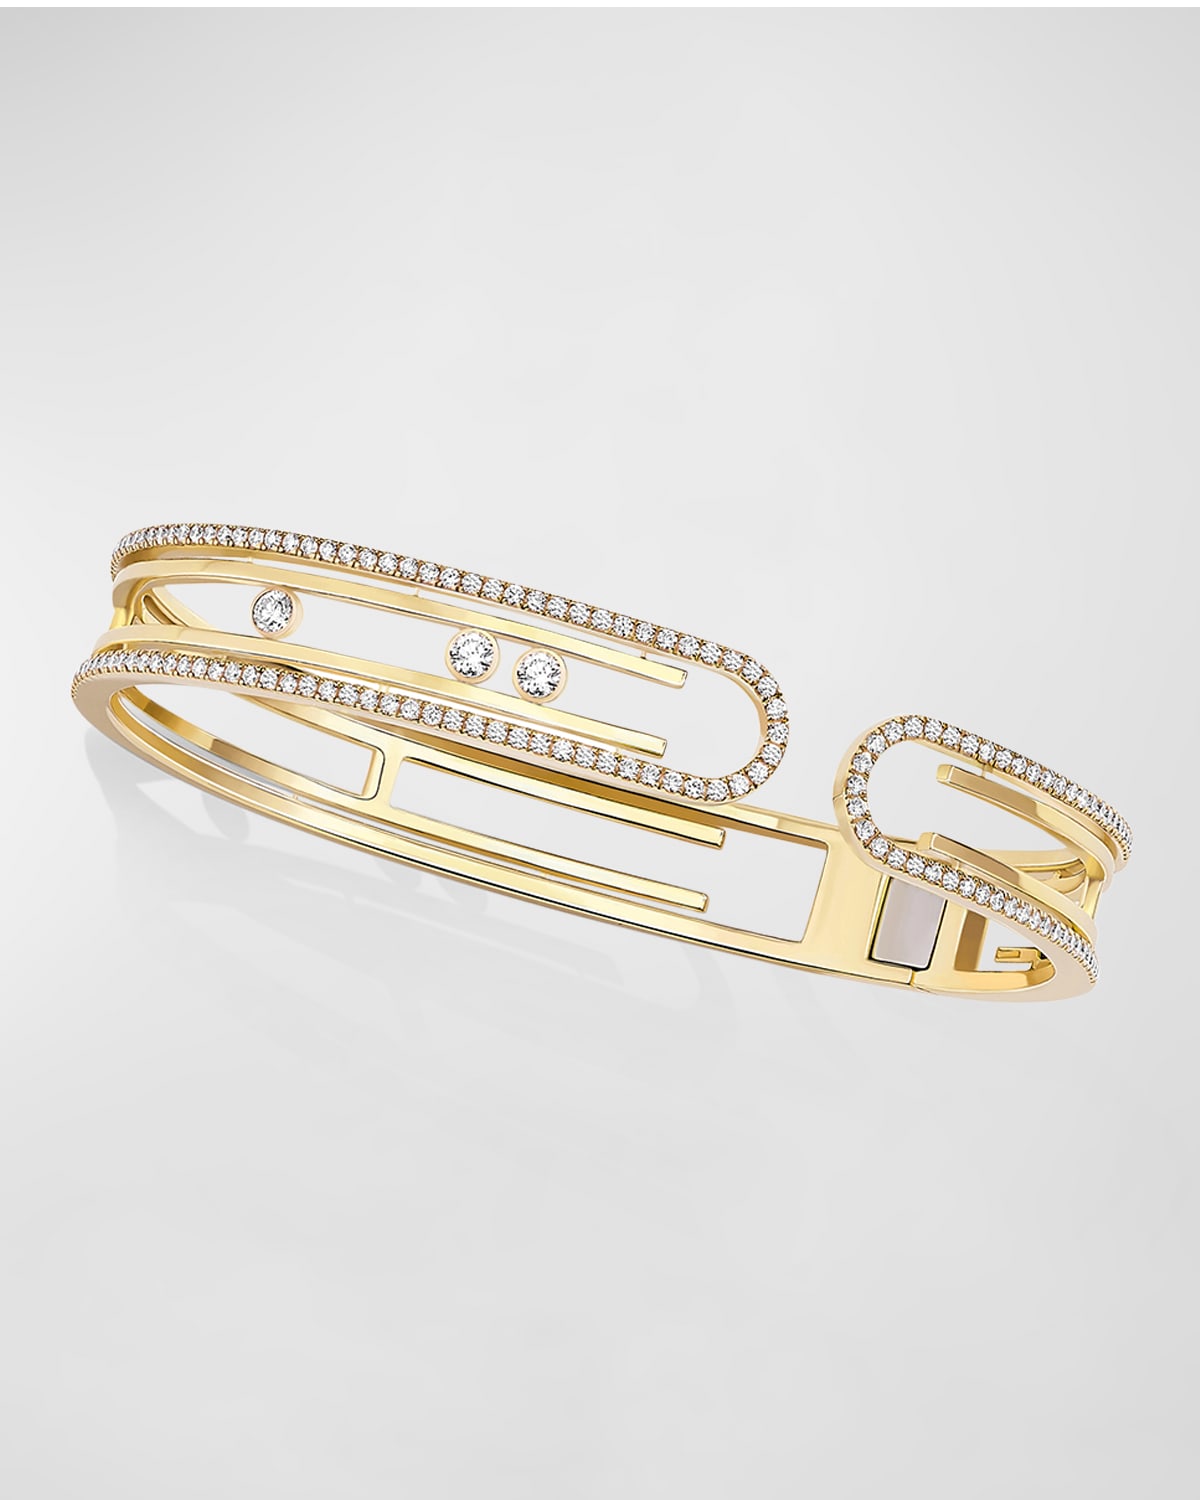 Messika Move Uno Pave Diamond Bangle Bracelet In 18k Yellow Gold In 05 Yellow Gold